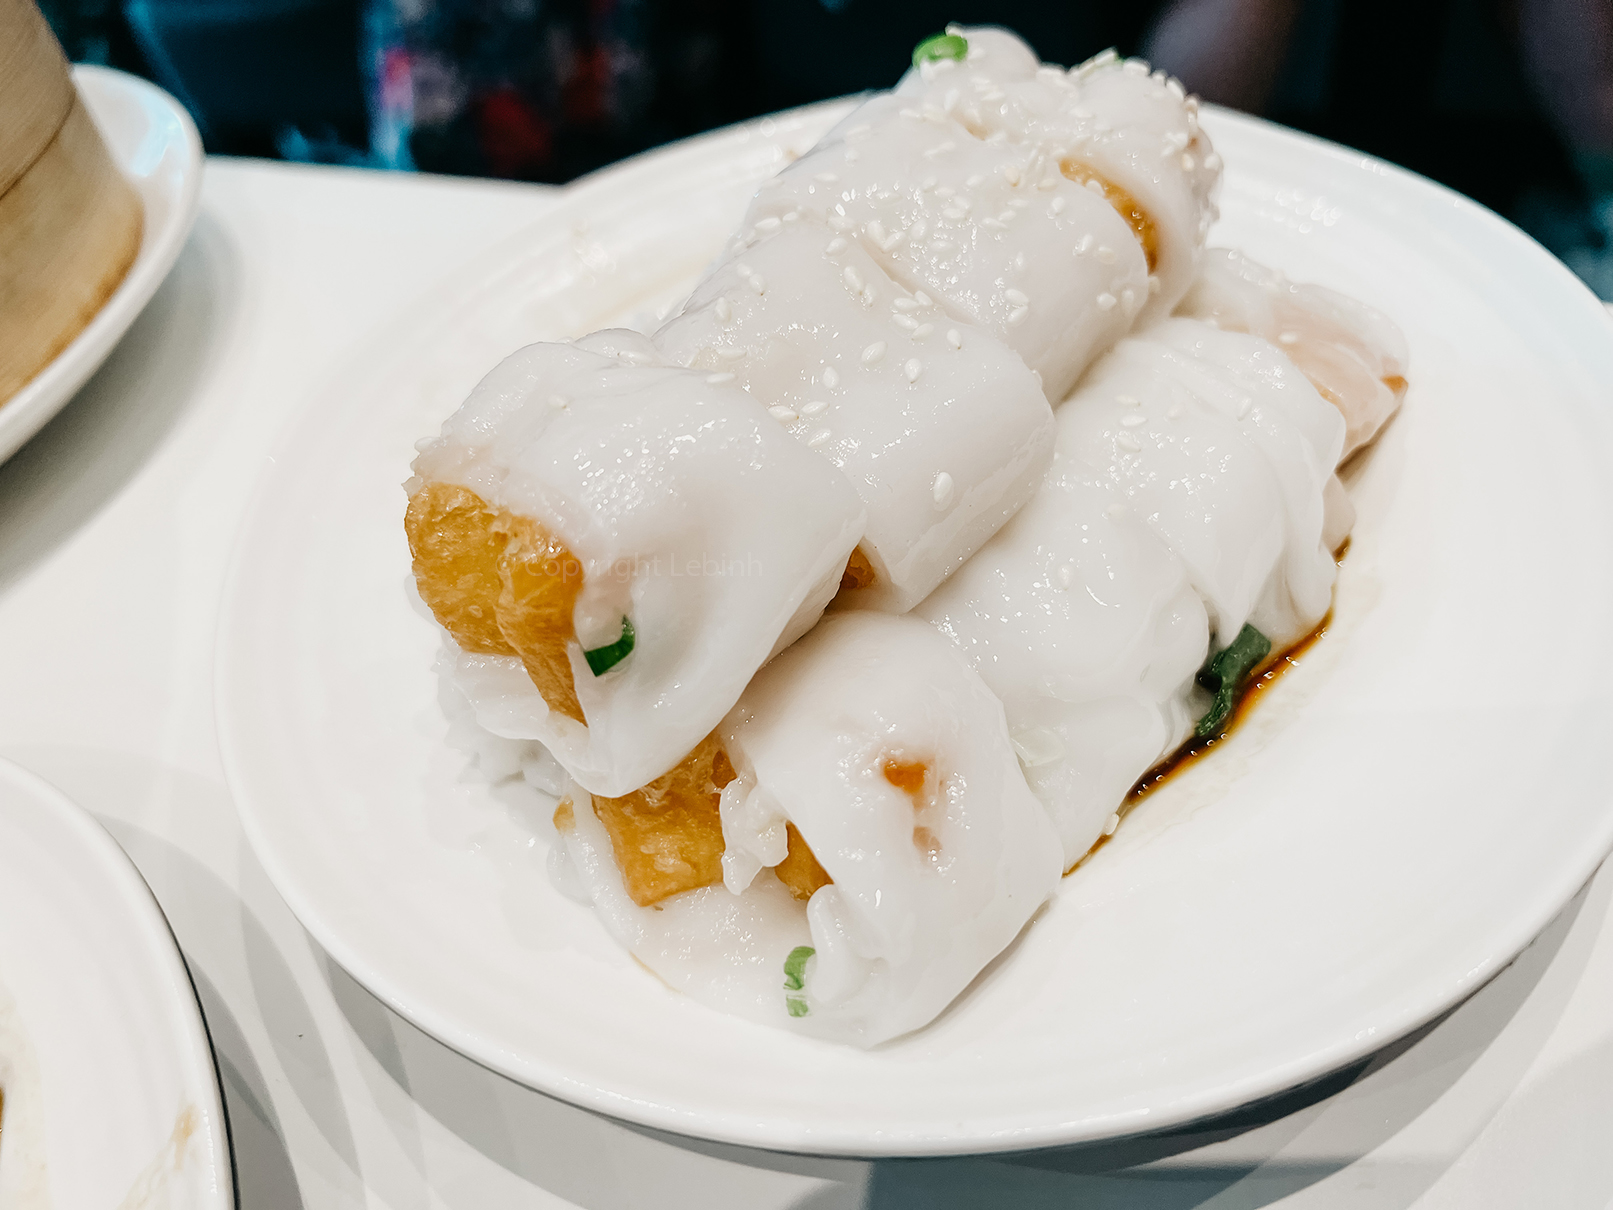 fried dough rice rolls - the food connoisseur